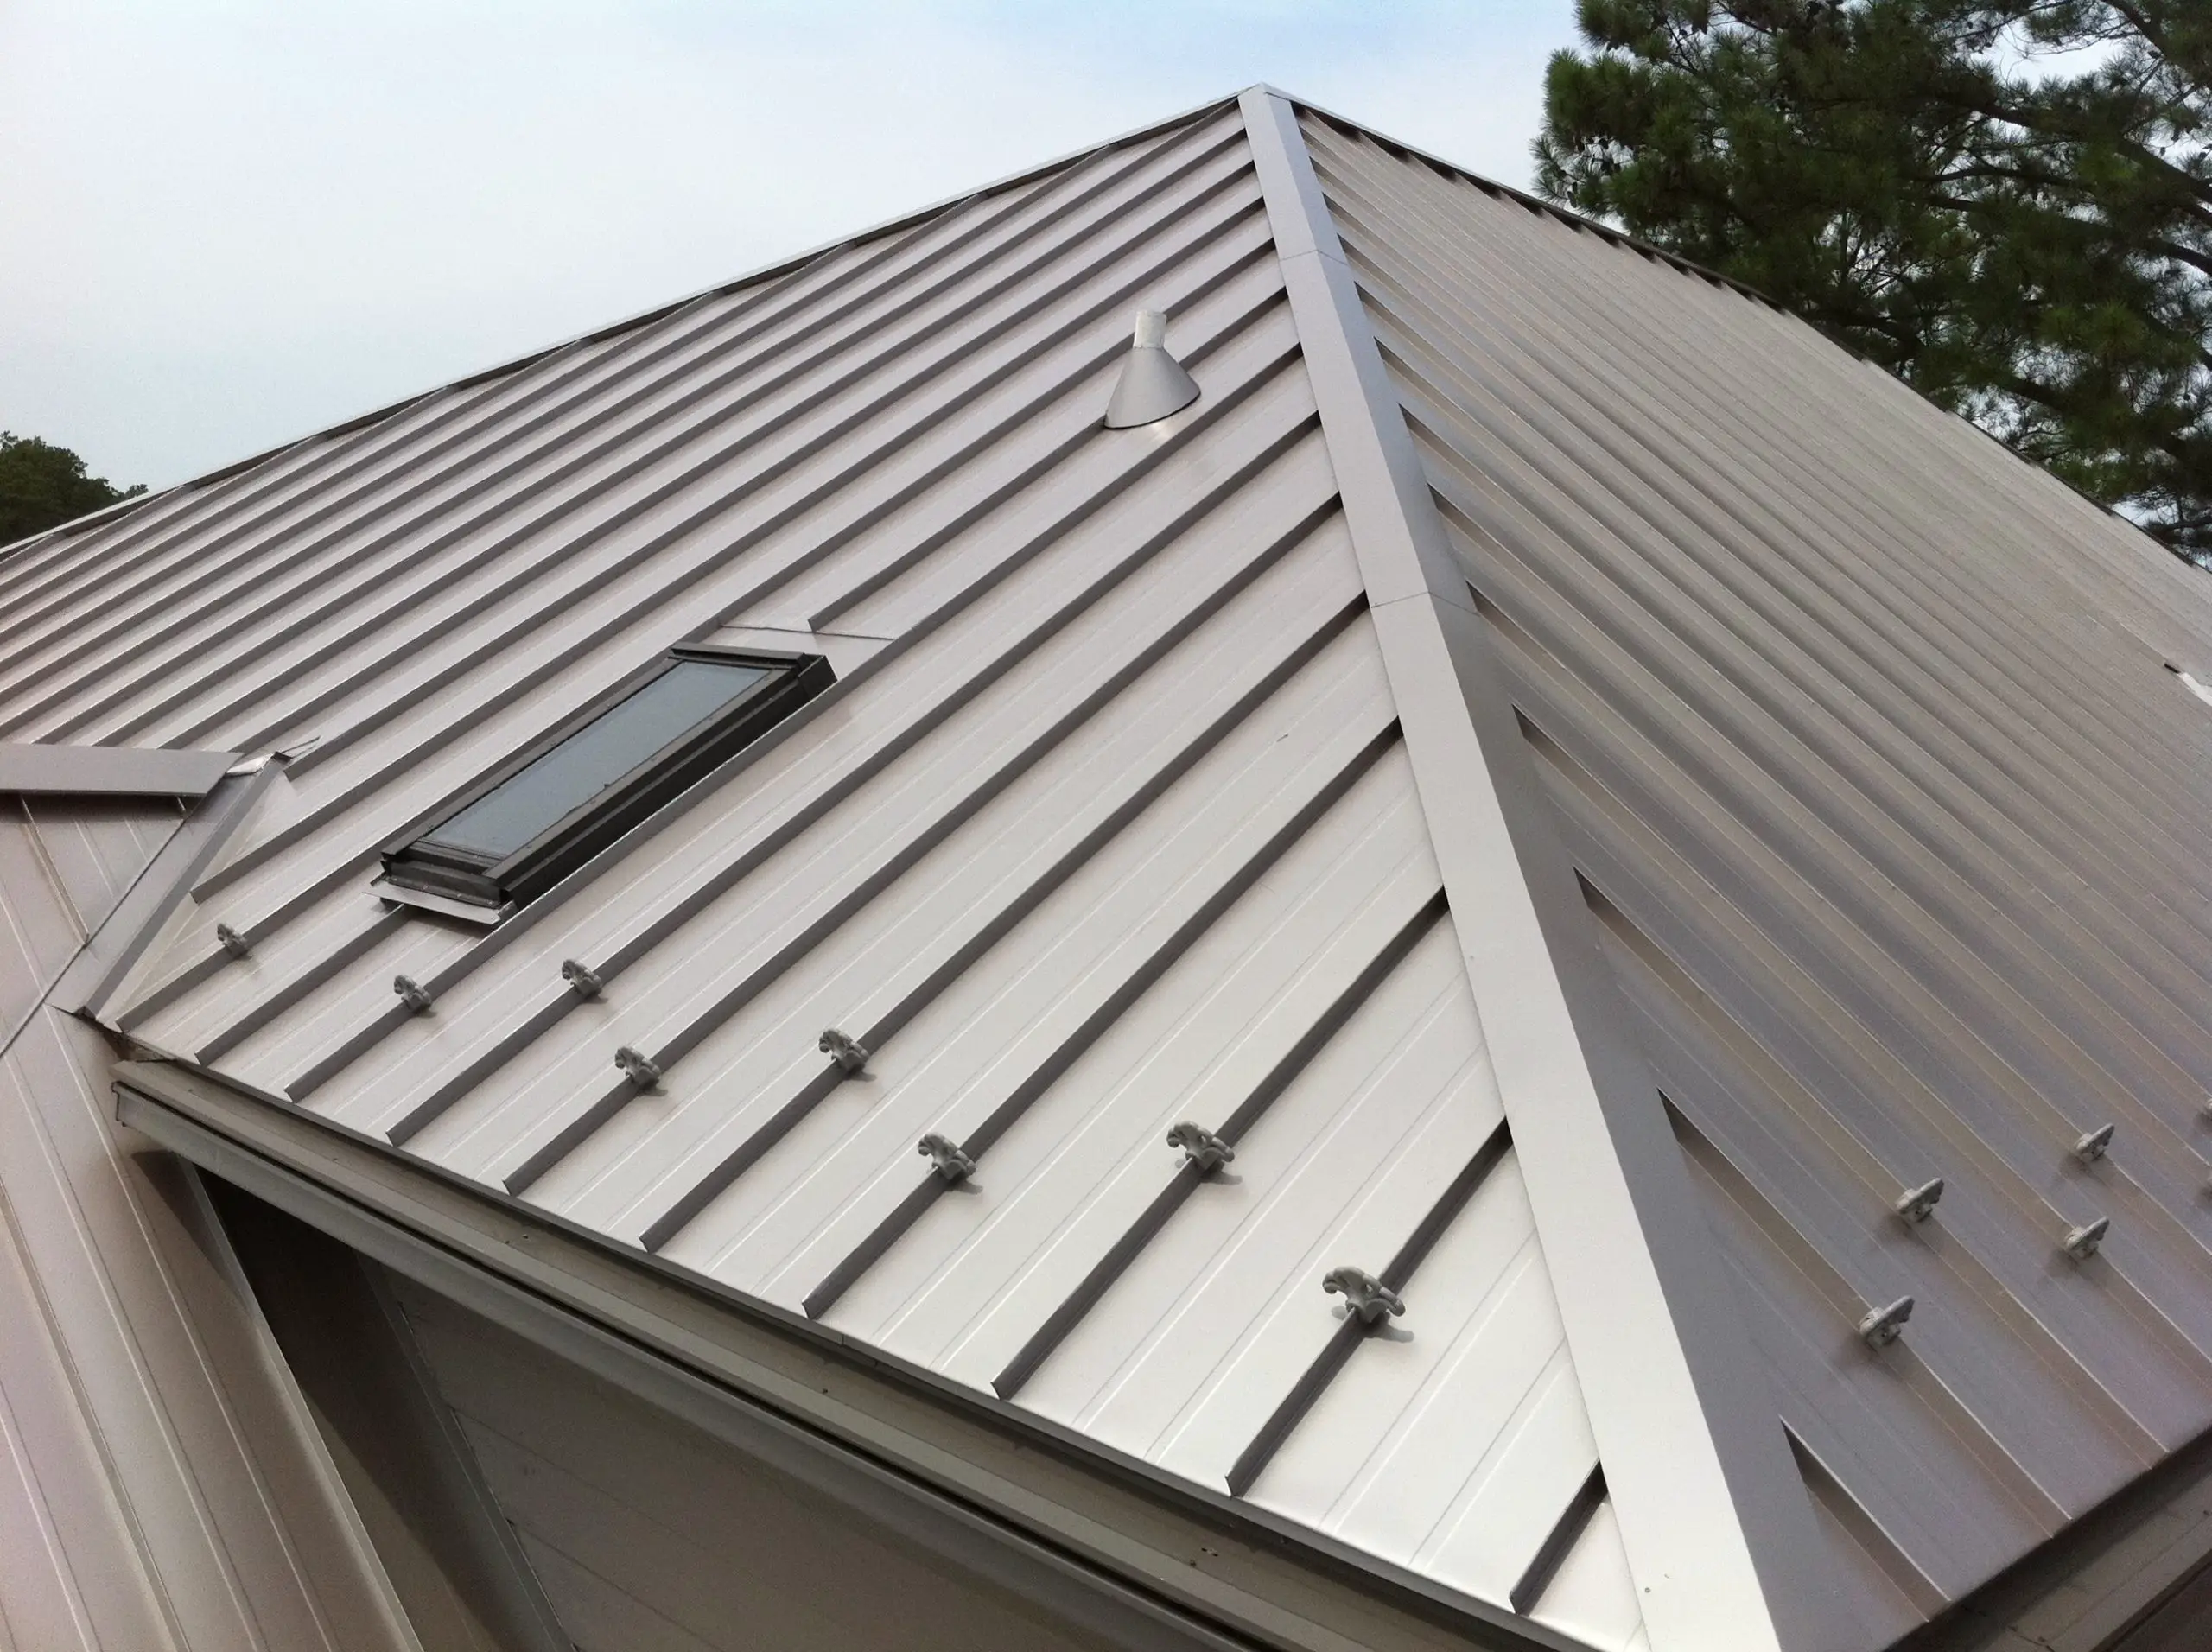 7 Reasons to Install a Standing Seam Metal Roof